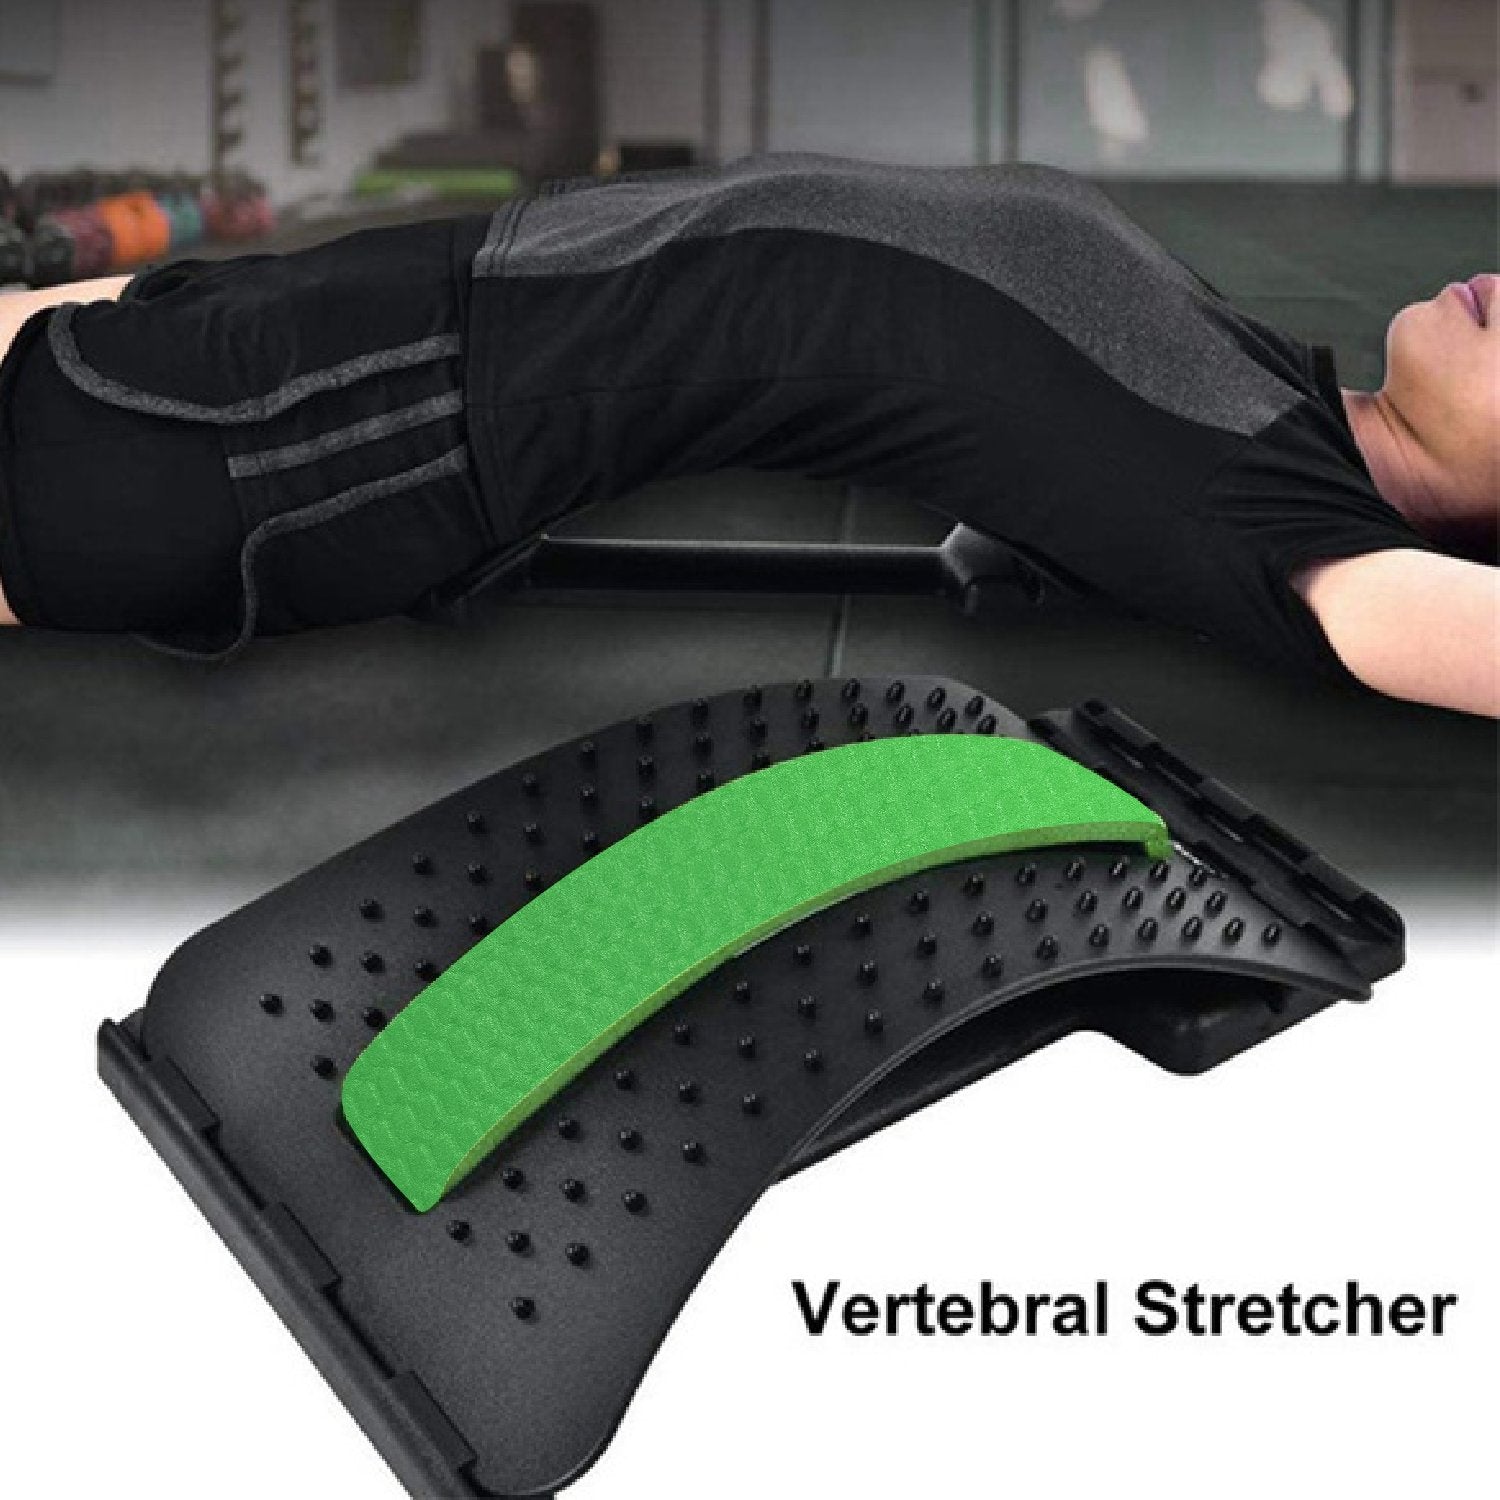 1666 Multi-Level Back Stretcher Posture Corrector Device For Back Pain Relief - SkyShopy